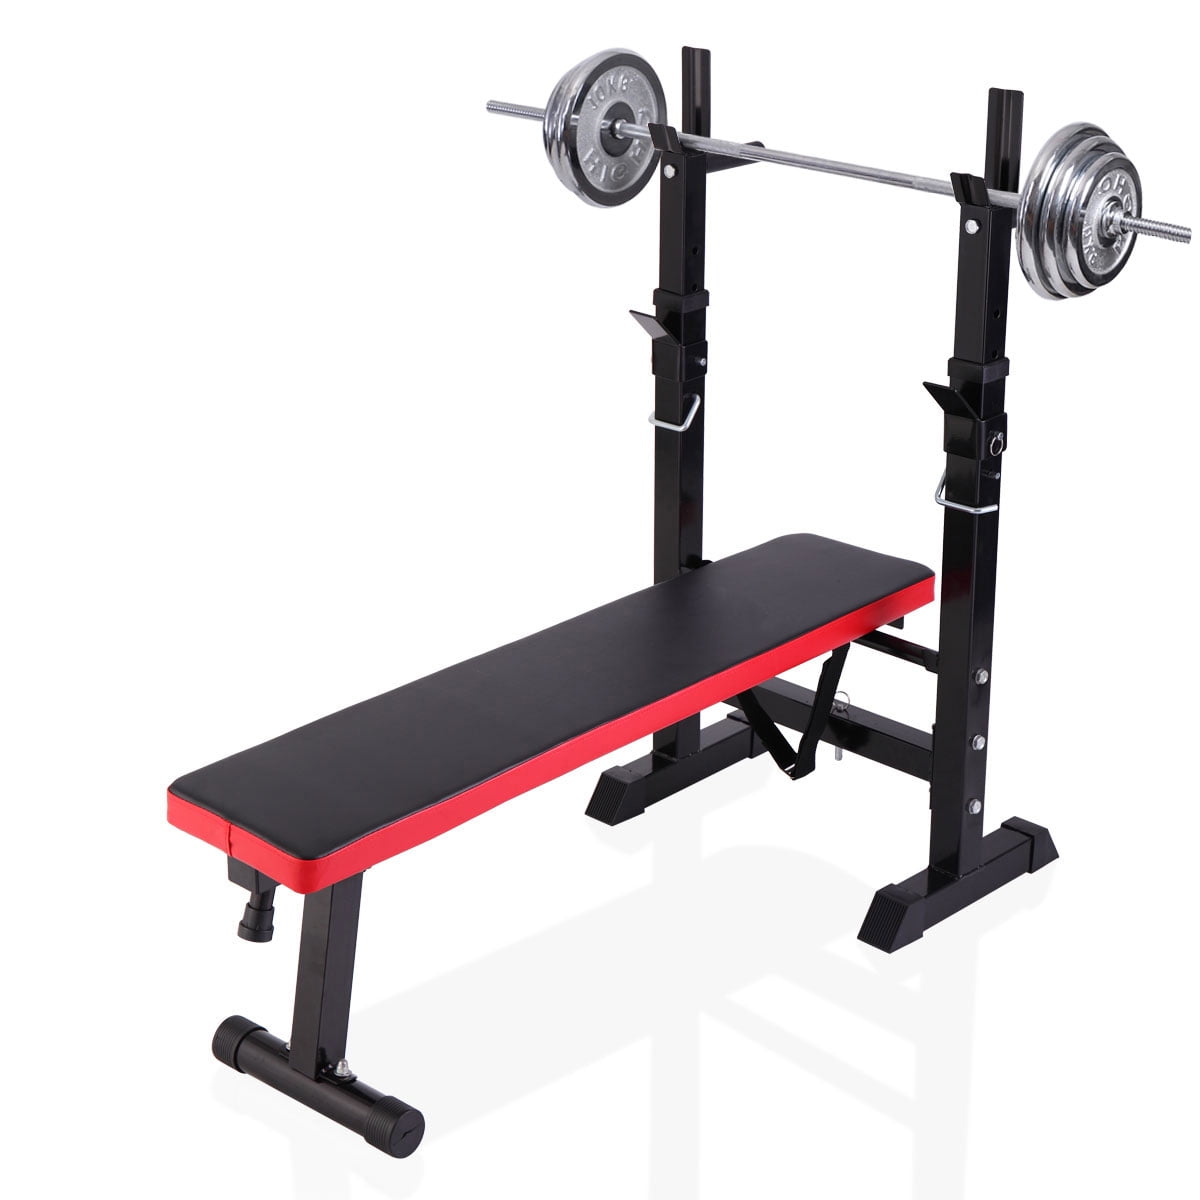 ADJUSTABLE WEIGHT BENCH Press Barbell Rack Exercise Strength Training Workout